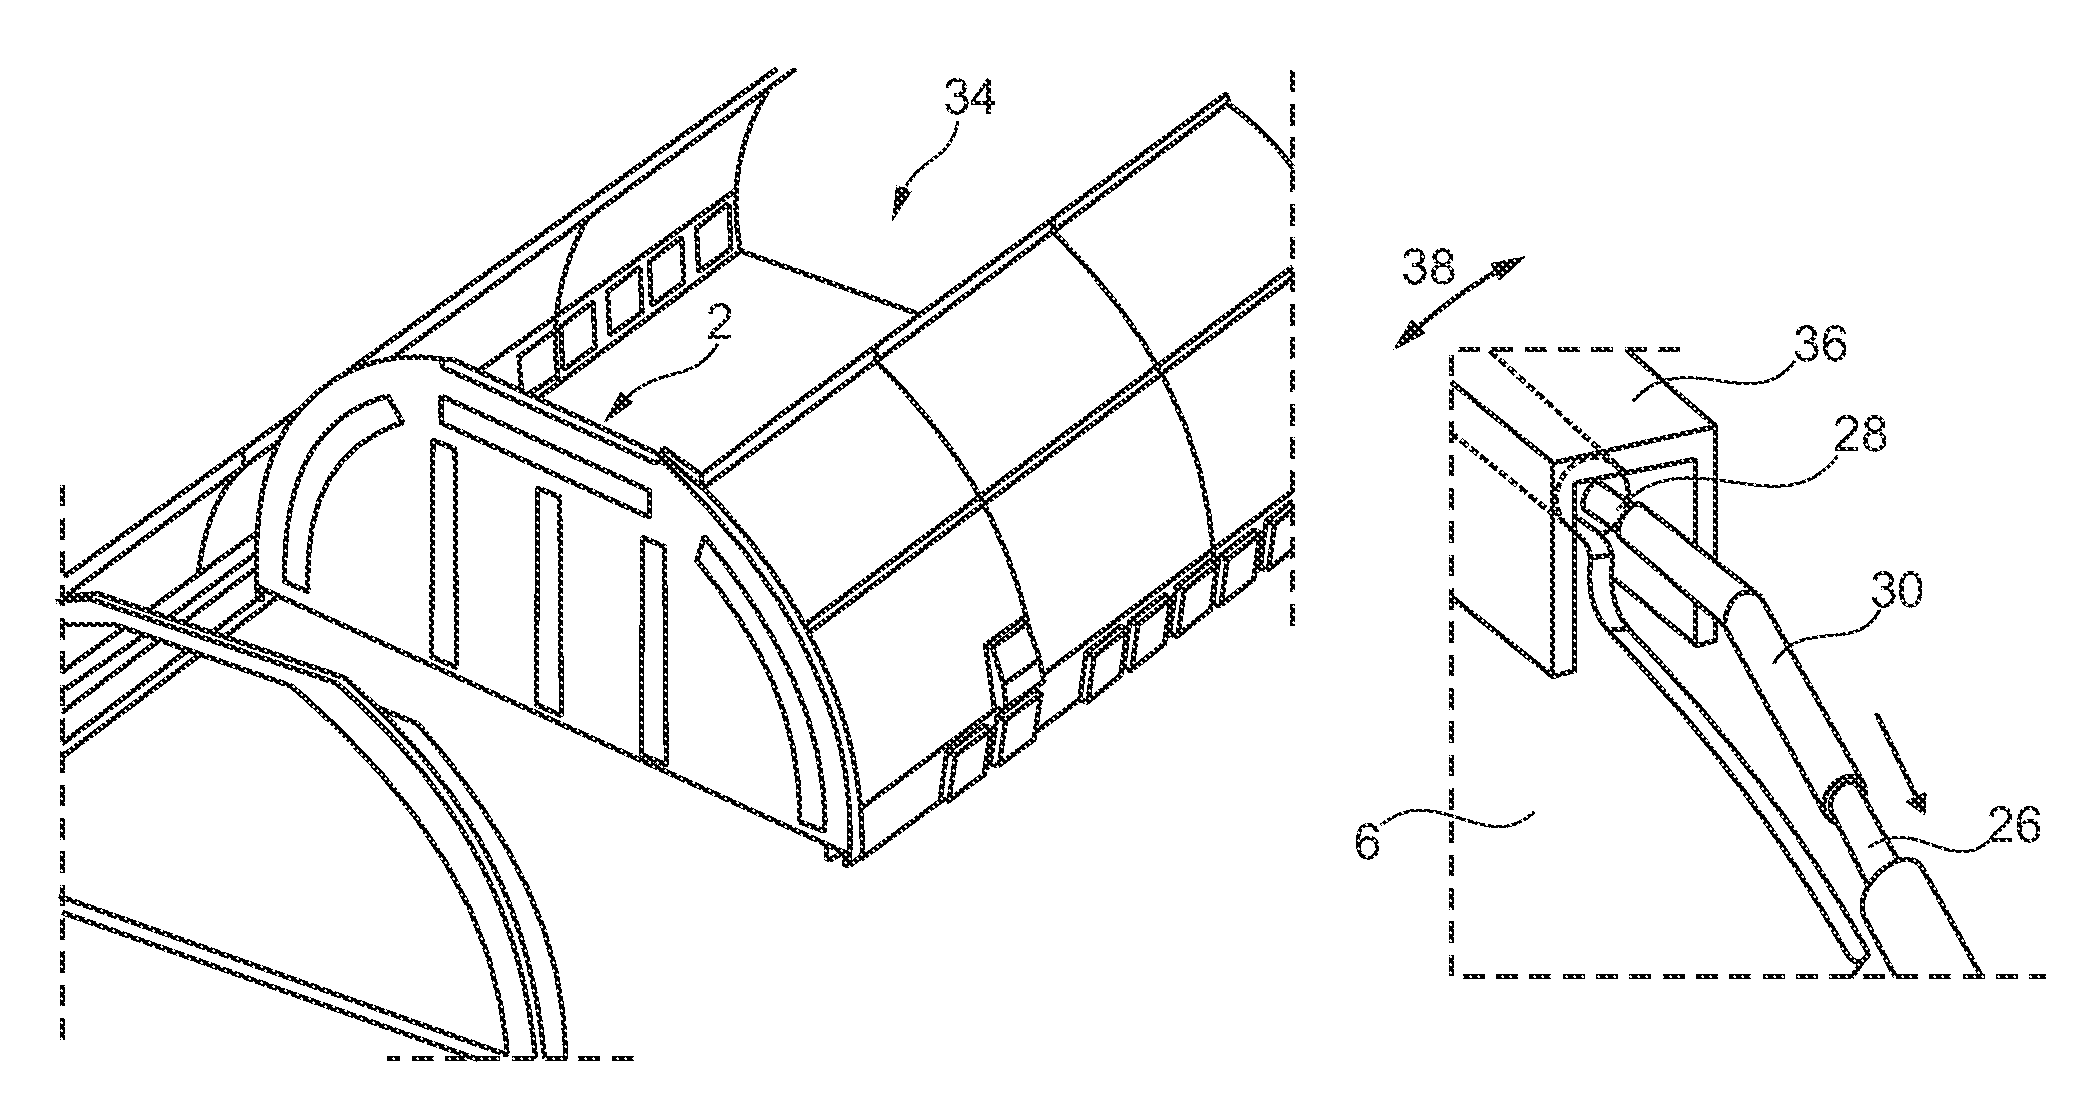 Assembly for separating a space into multiple areas